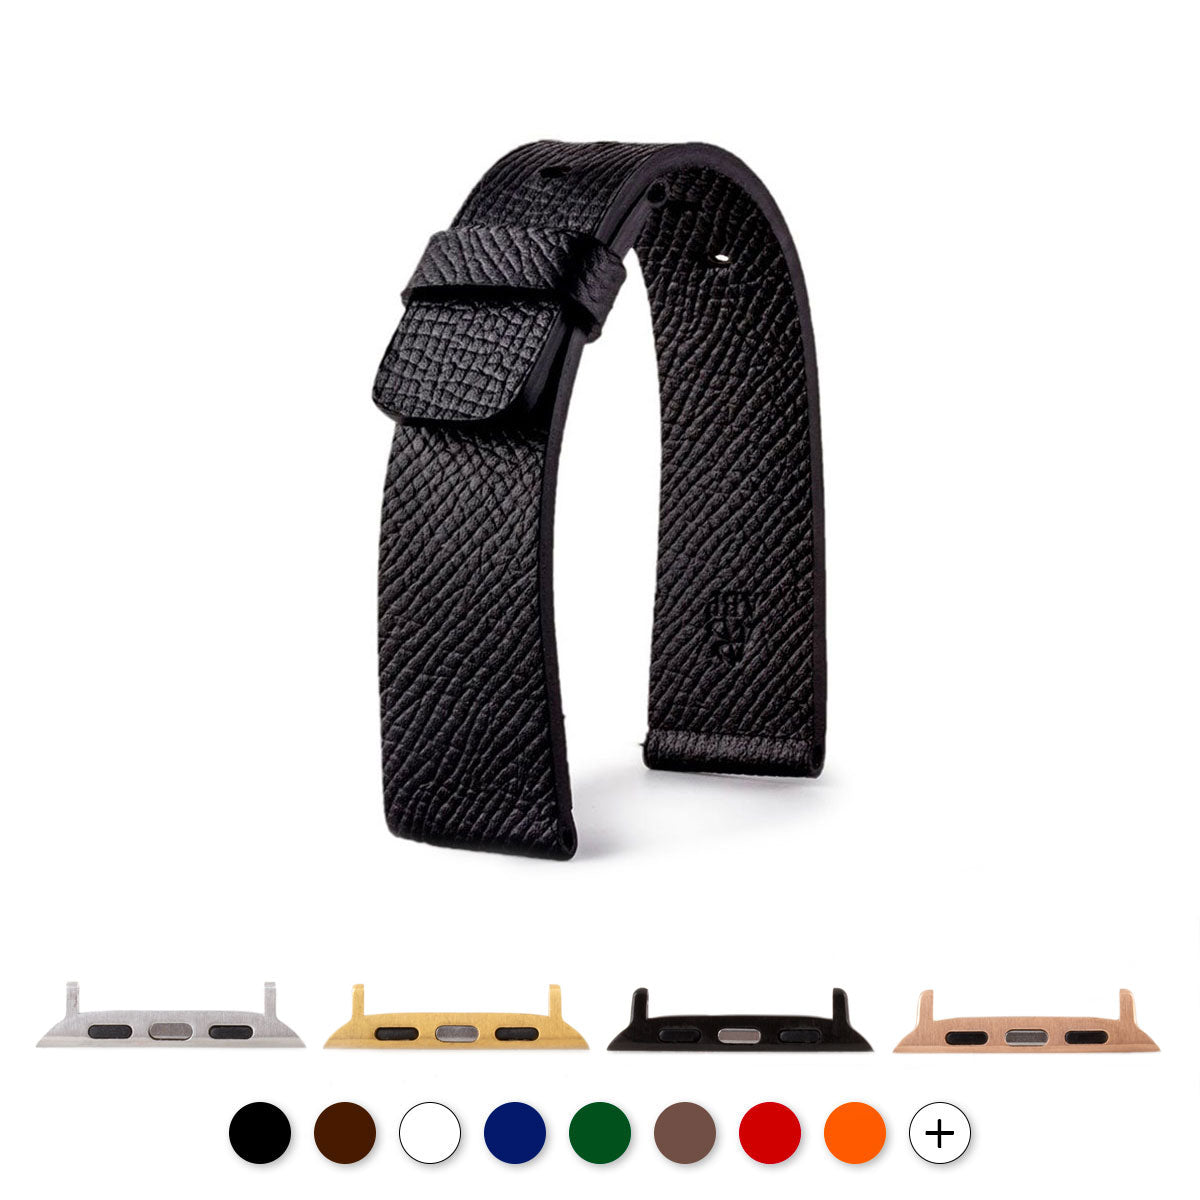 ​Apple Watch - Leather watchband - Grained calf (black, blue, brown, green, red, orange...)